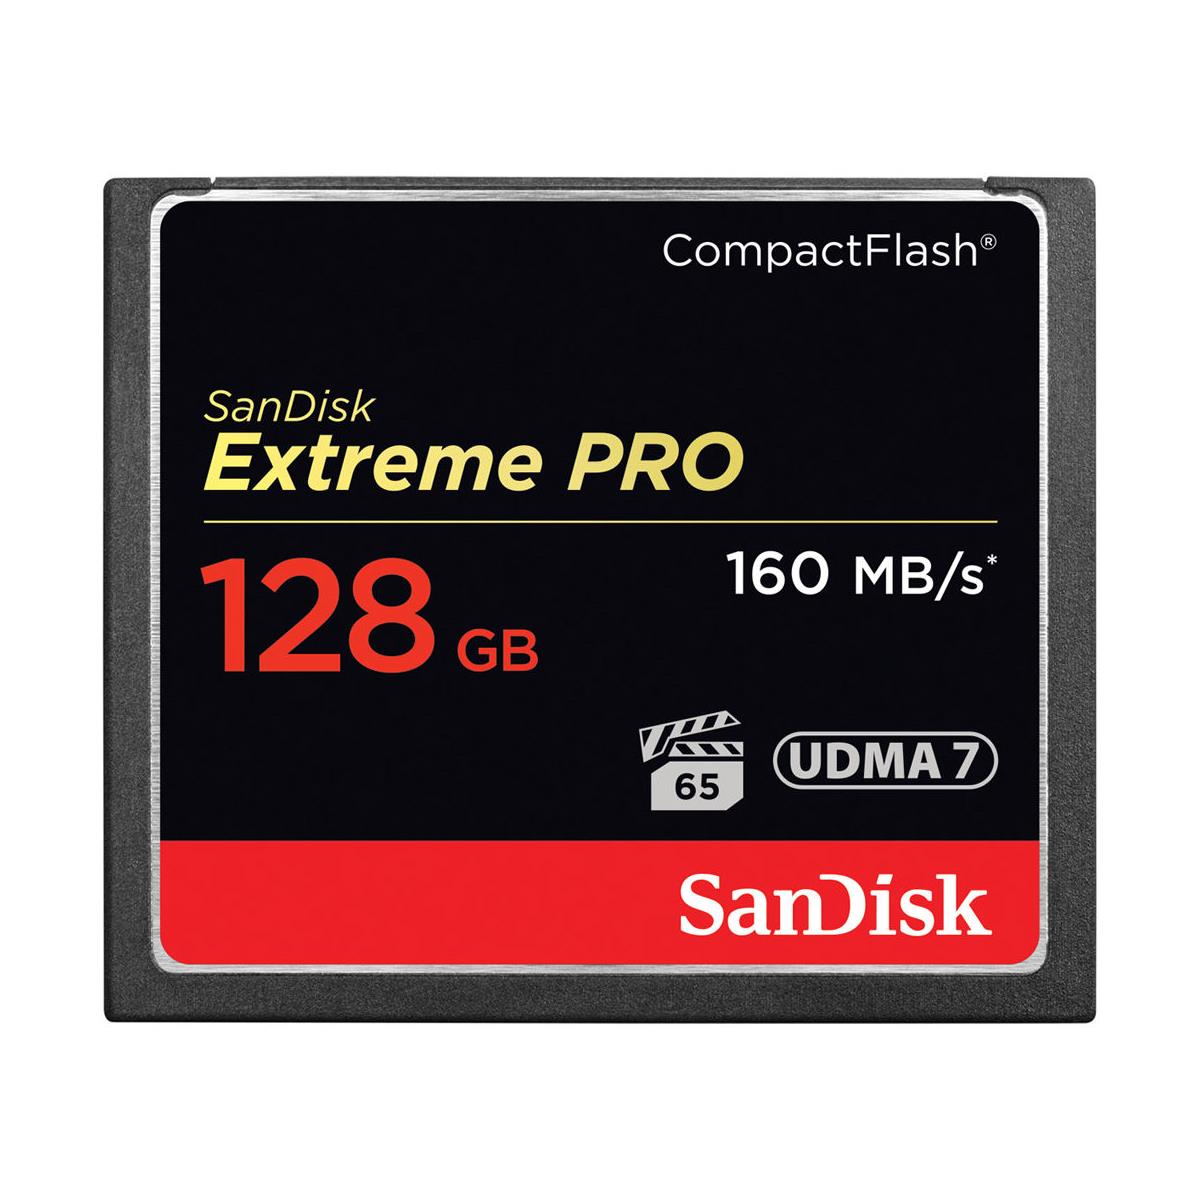 Image of SanDisk 128GB Extreme PRO CompactFlash Memory Card